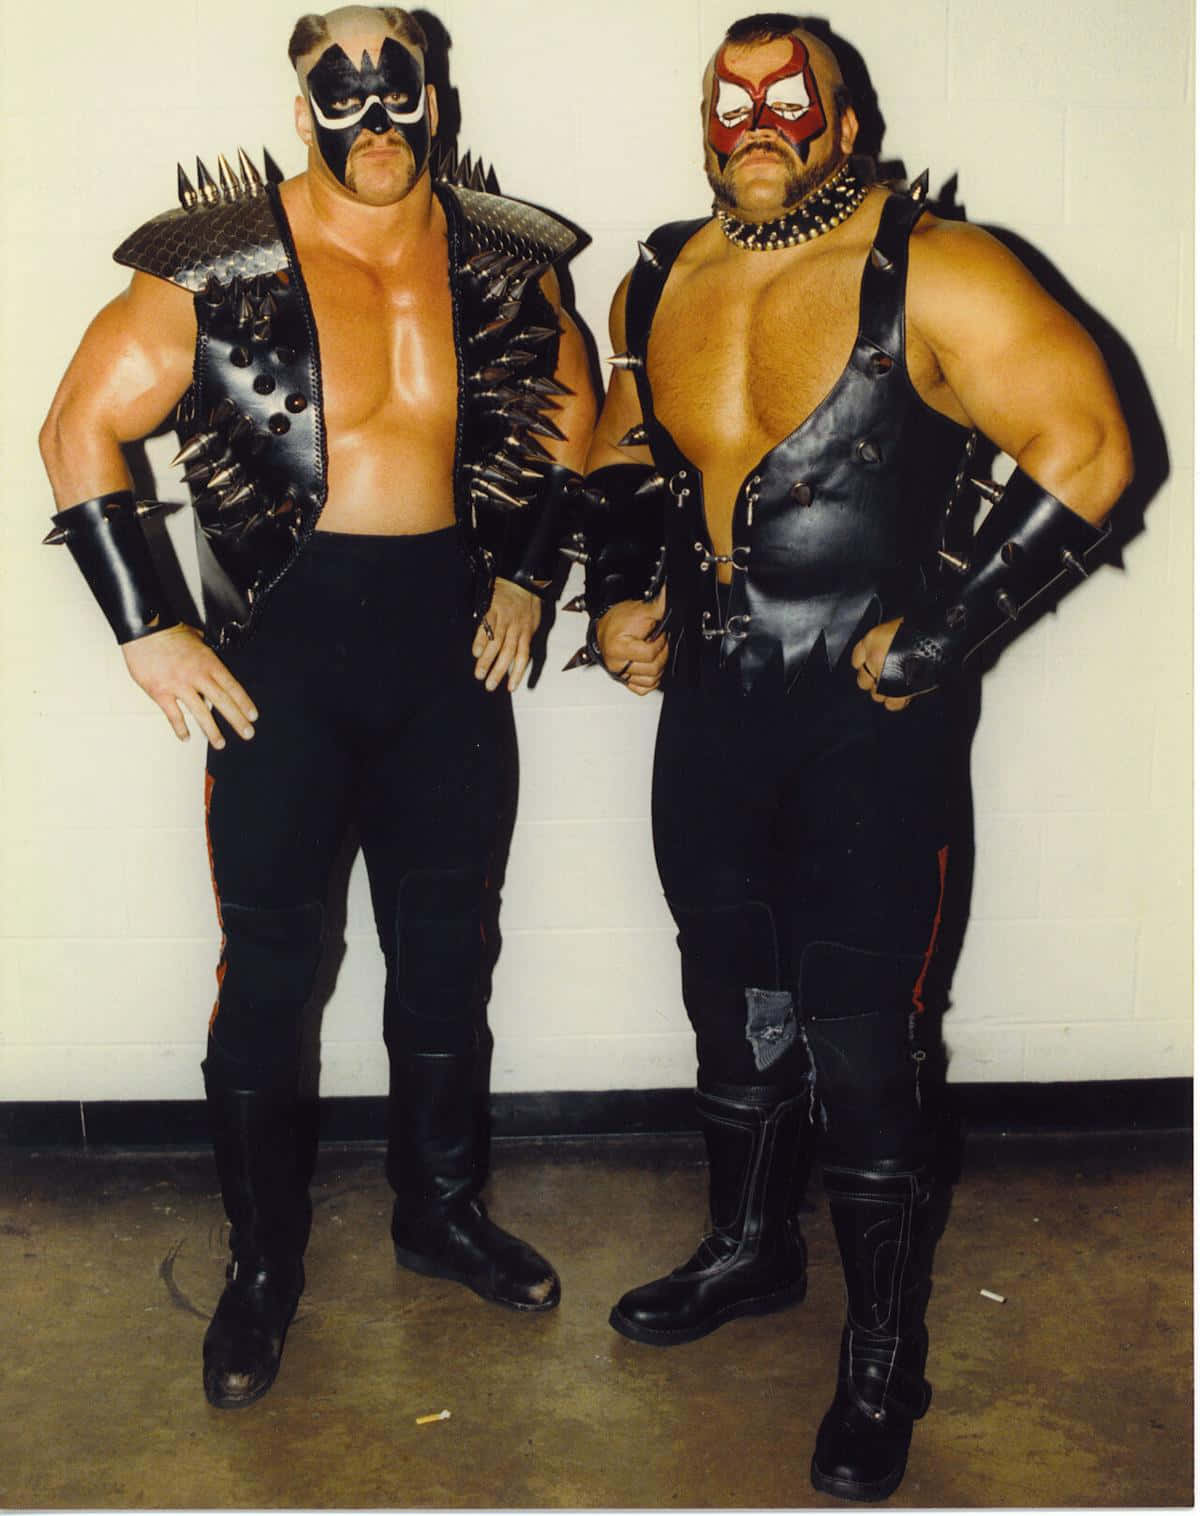 NWA Champions - Road Warrior Hawk and Road Warrior Animal in Action Wallpaper